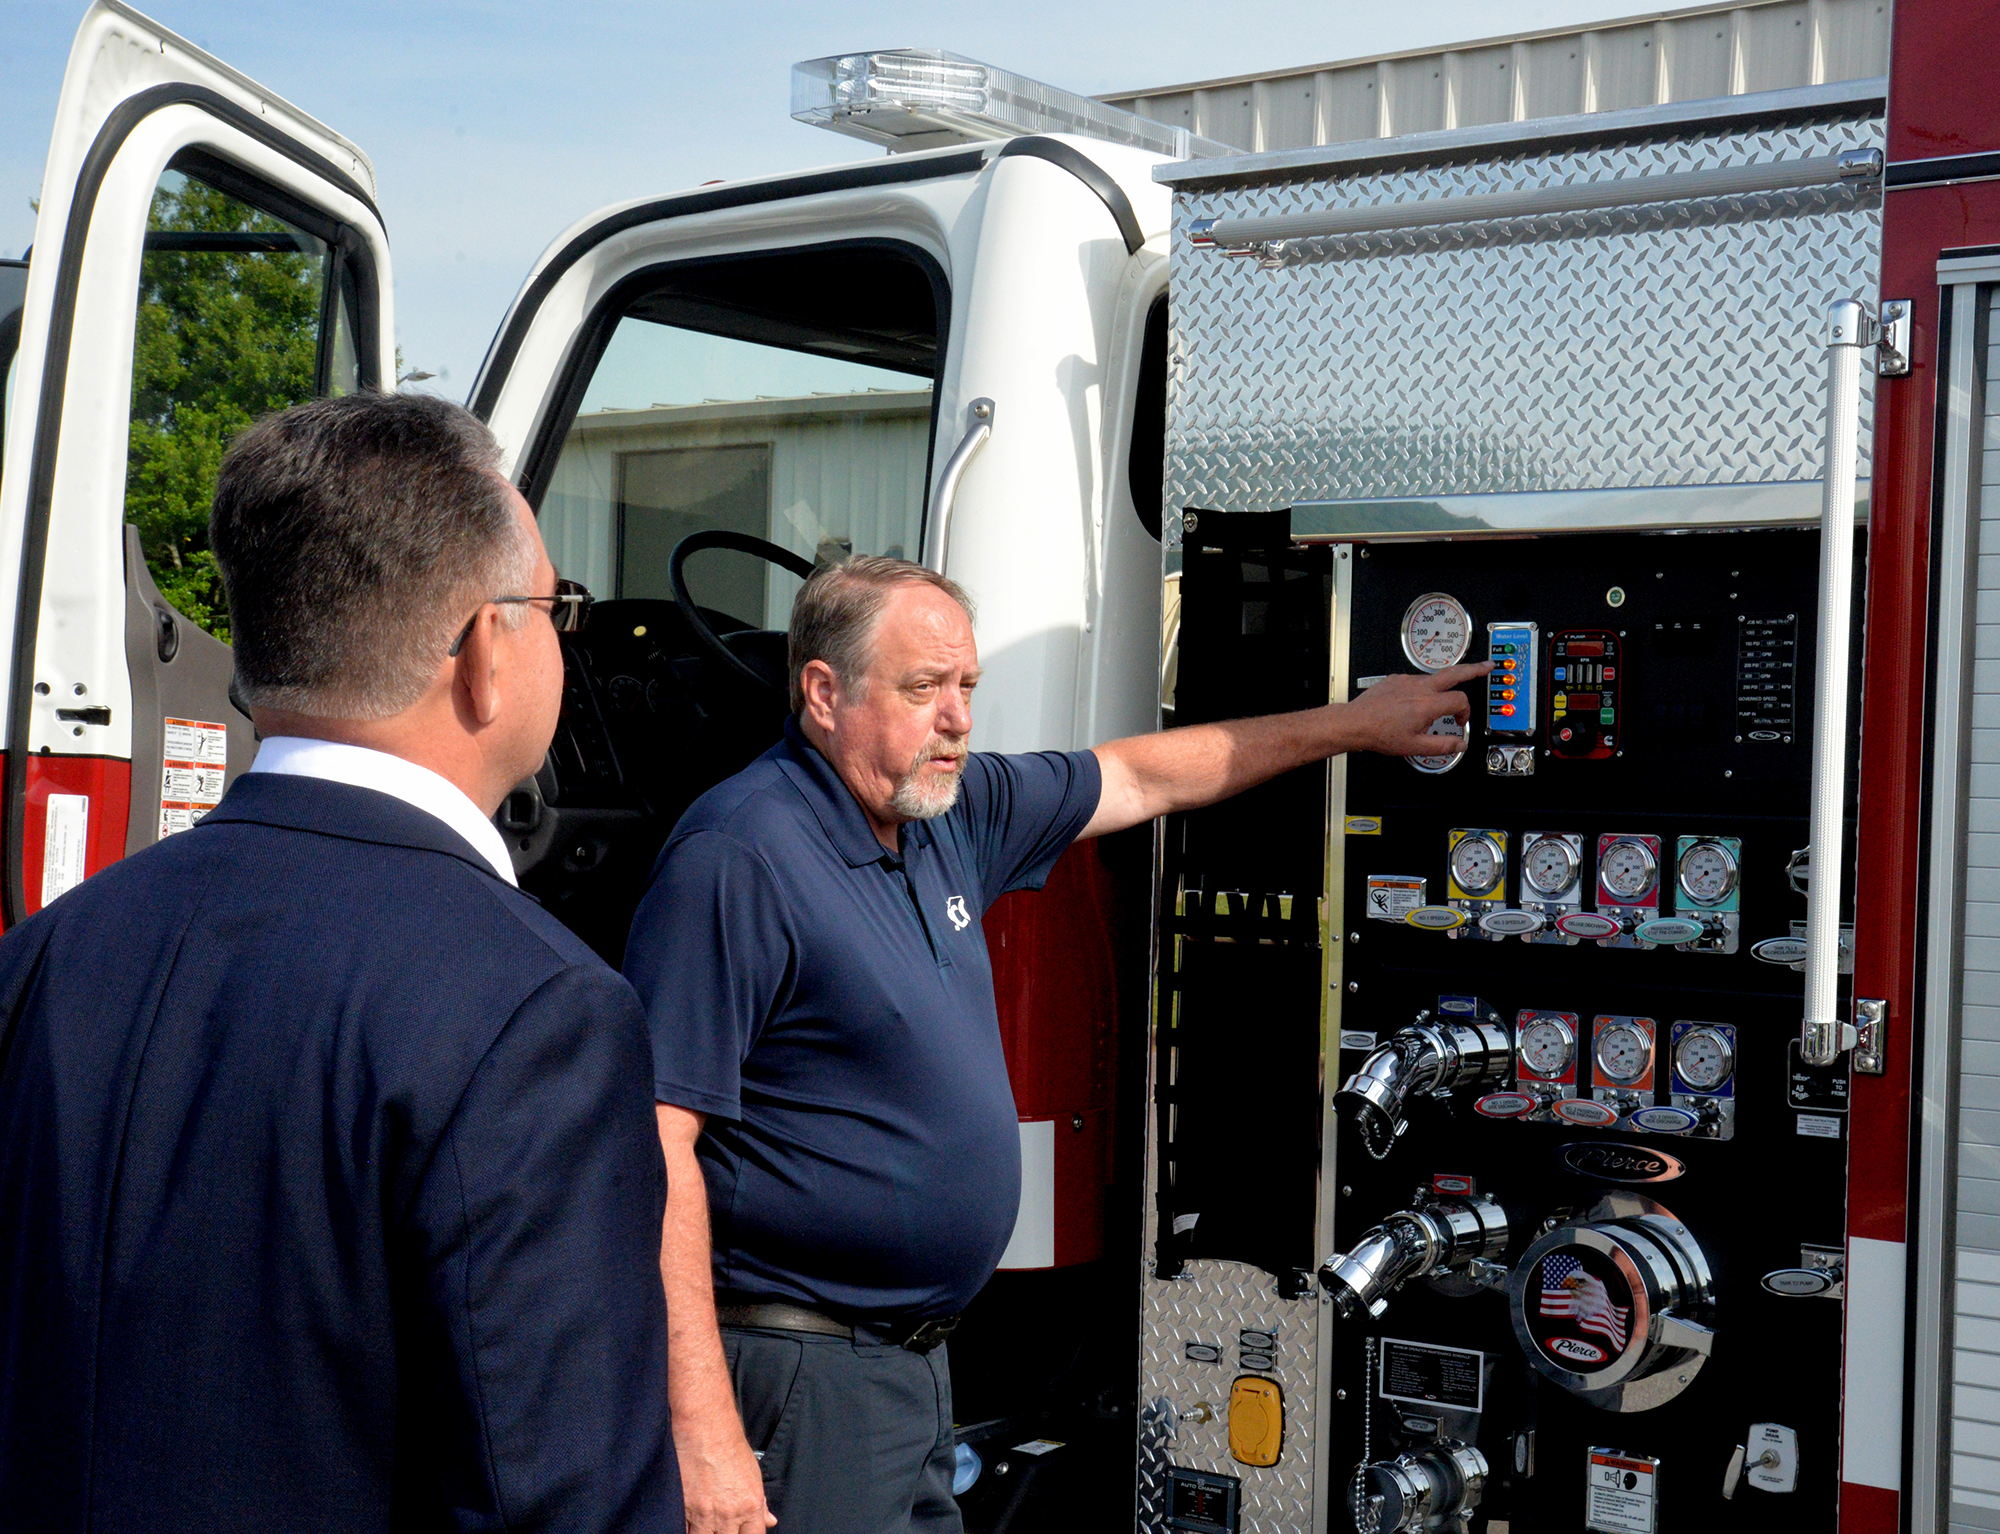 Alan McWilliams (right), SCC’s Fire/Rescue Program Director, shows N.C. Rep. Karl Gillespie the instrument panel on the college’s new fire truck that was purchased with funds. Rep. Gillespie helped secure for Southwestern.